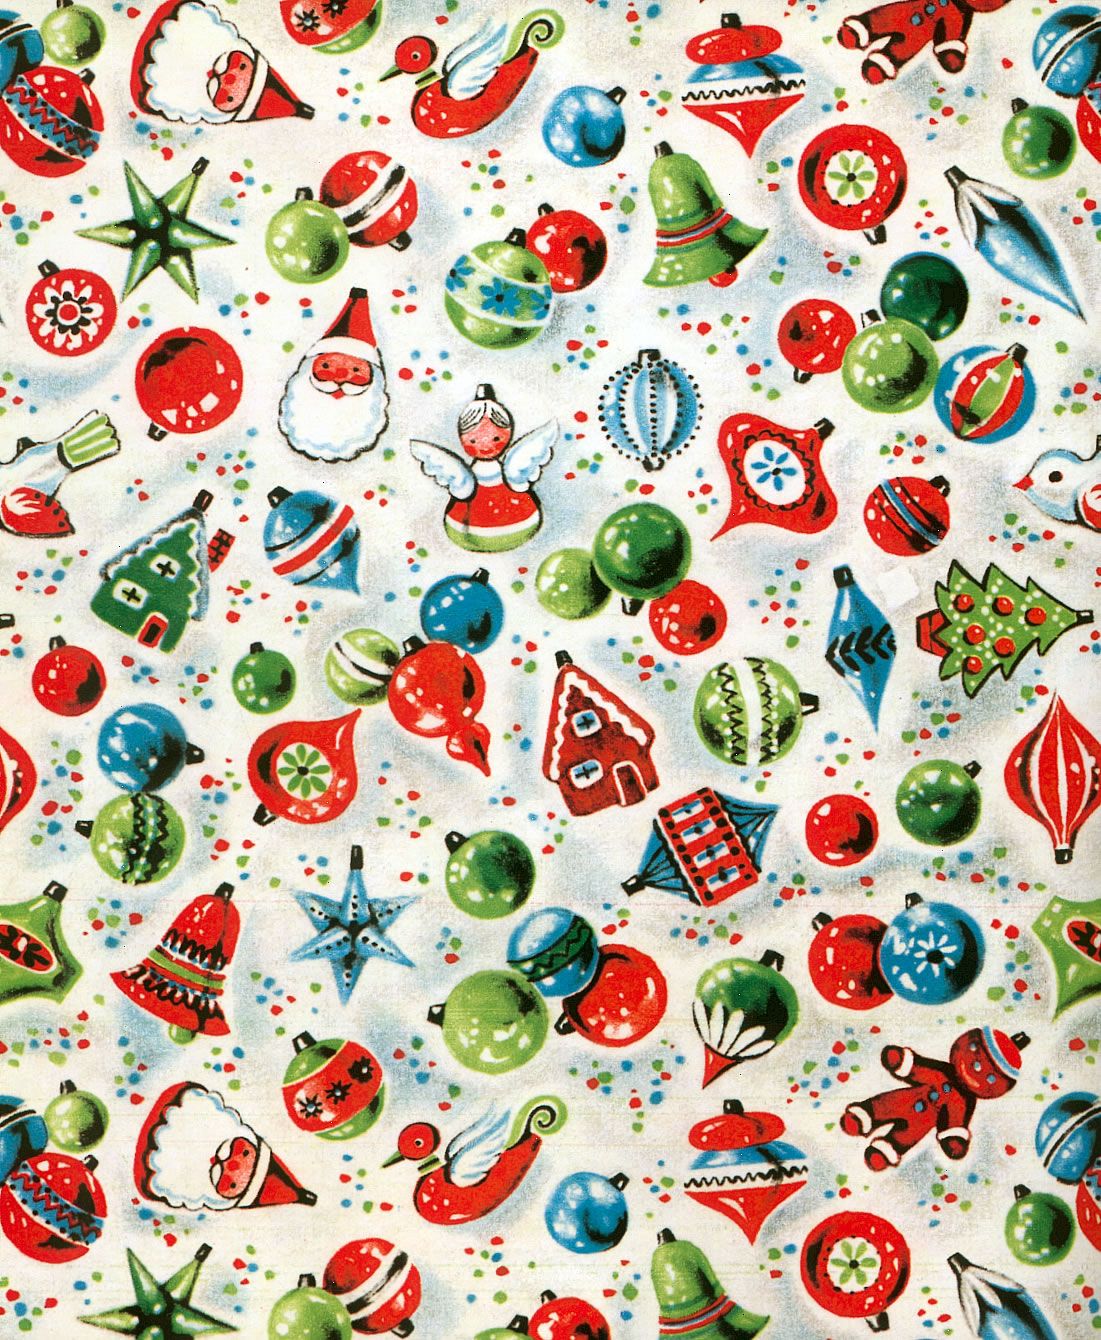 Old Christmas Wrapping Paper - HD Wallpaper 